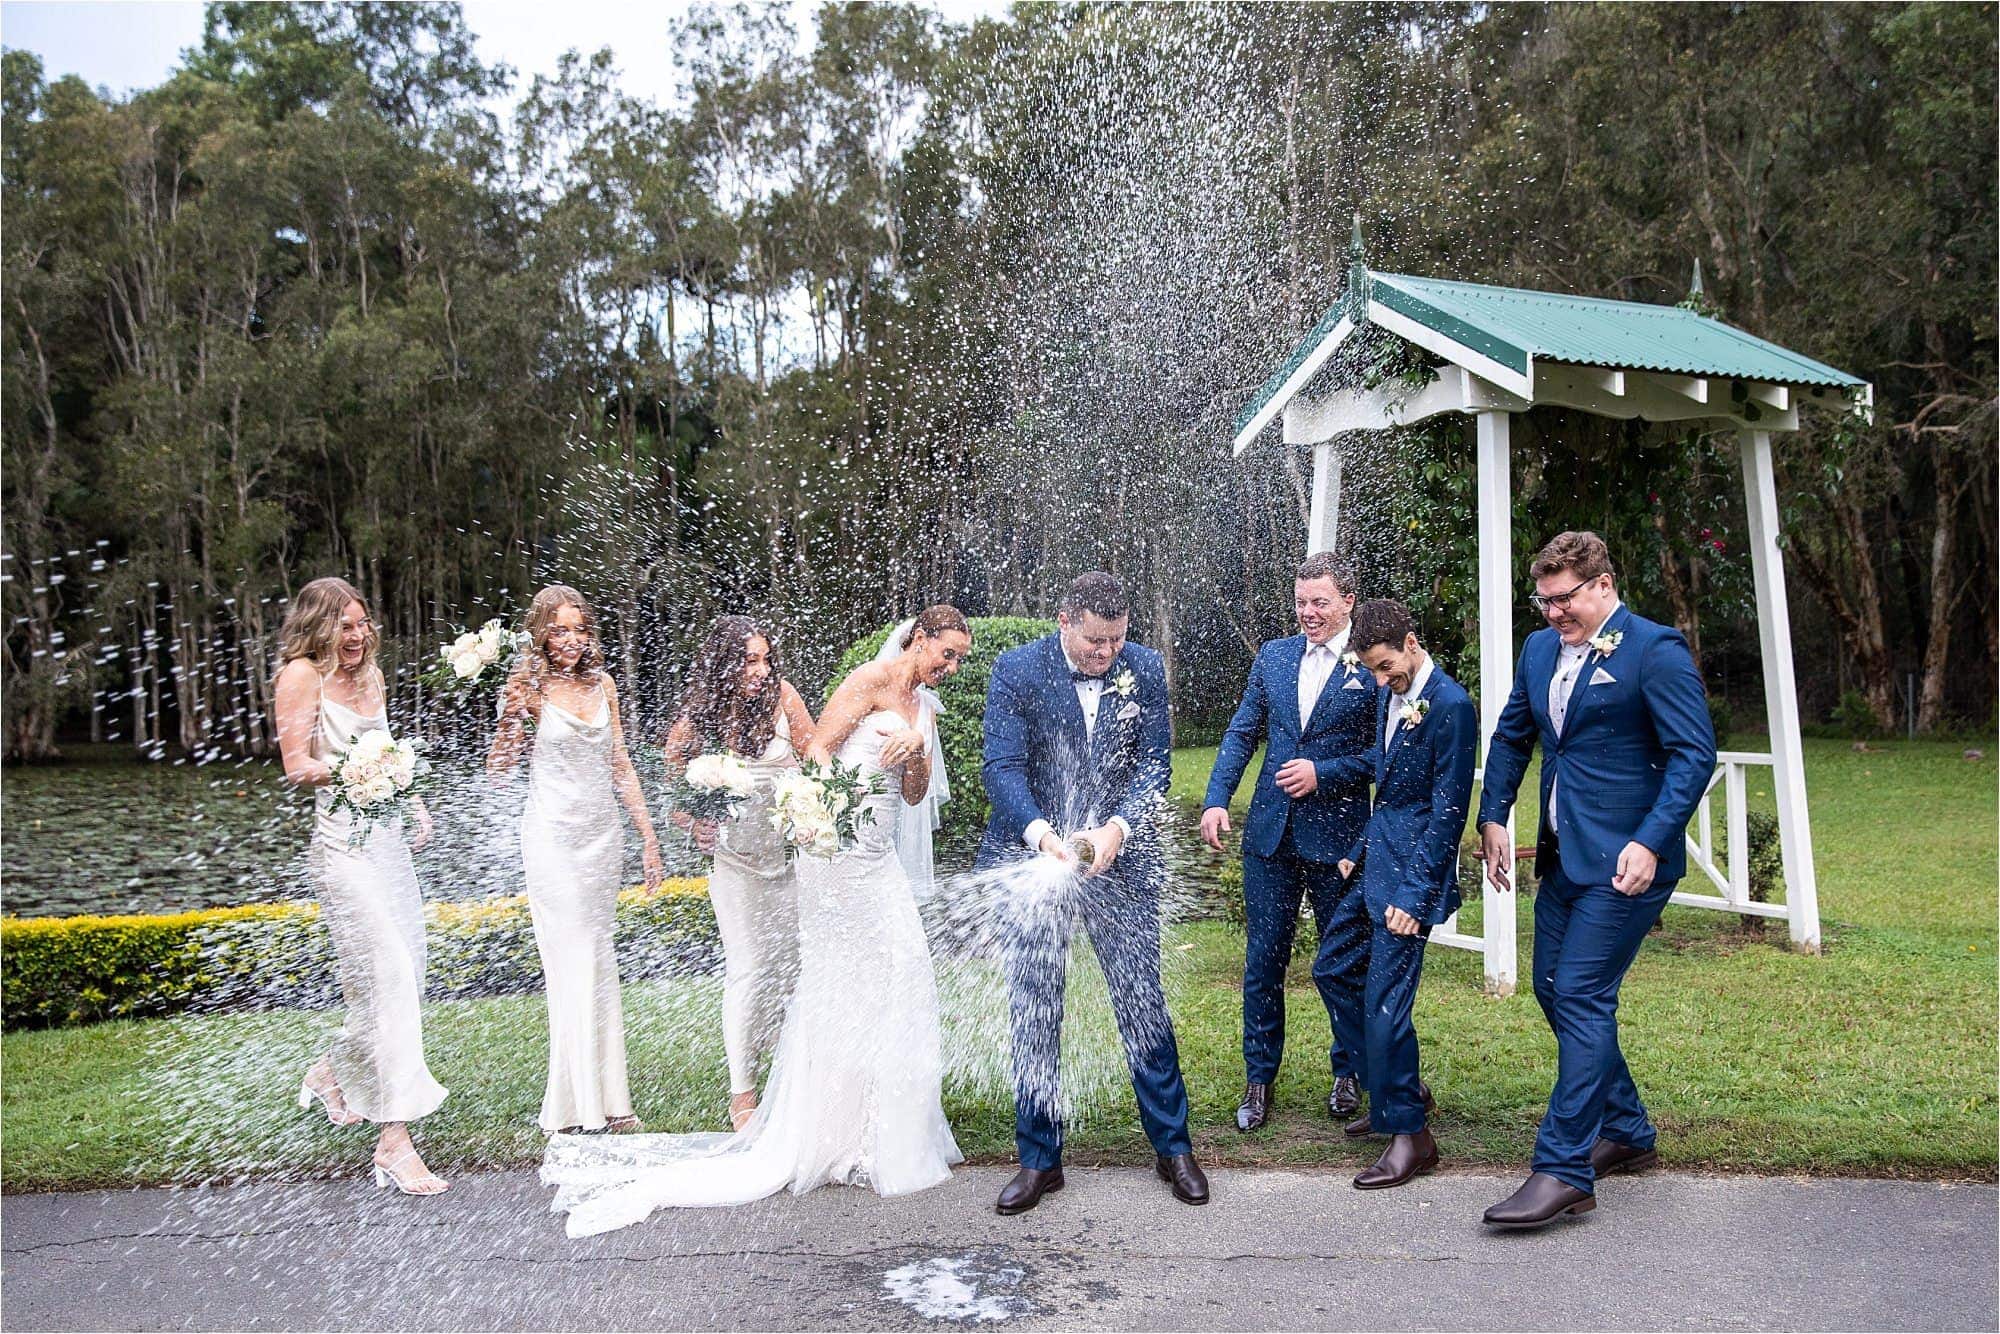 Bridal party spraying champagne during photos at Coolibah down Estate, by Mooi Photography.